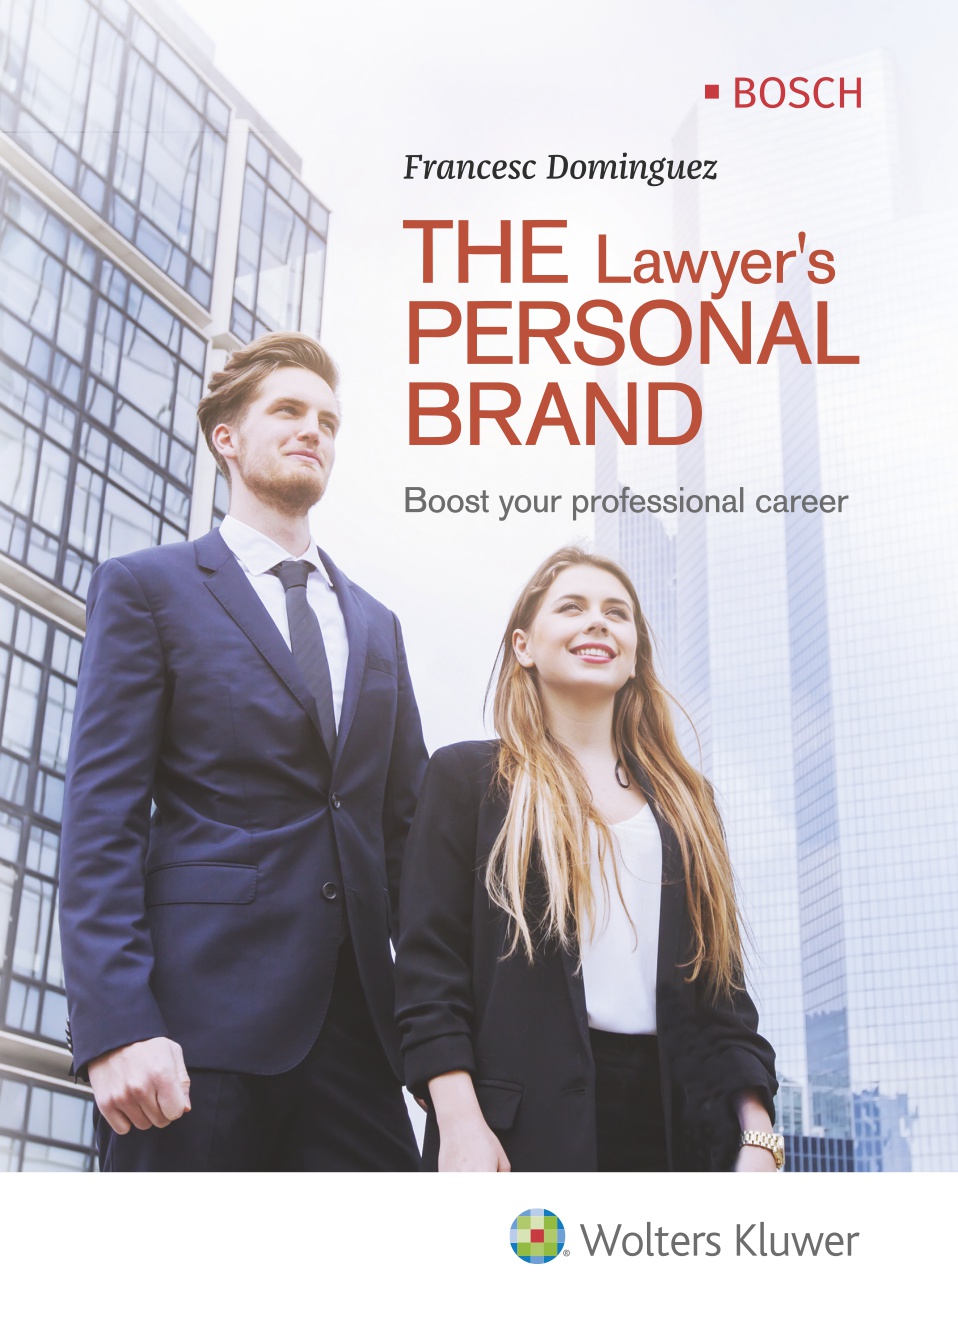 The lawyer's personal brand